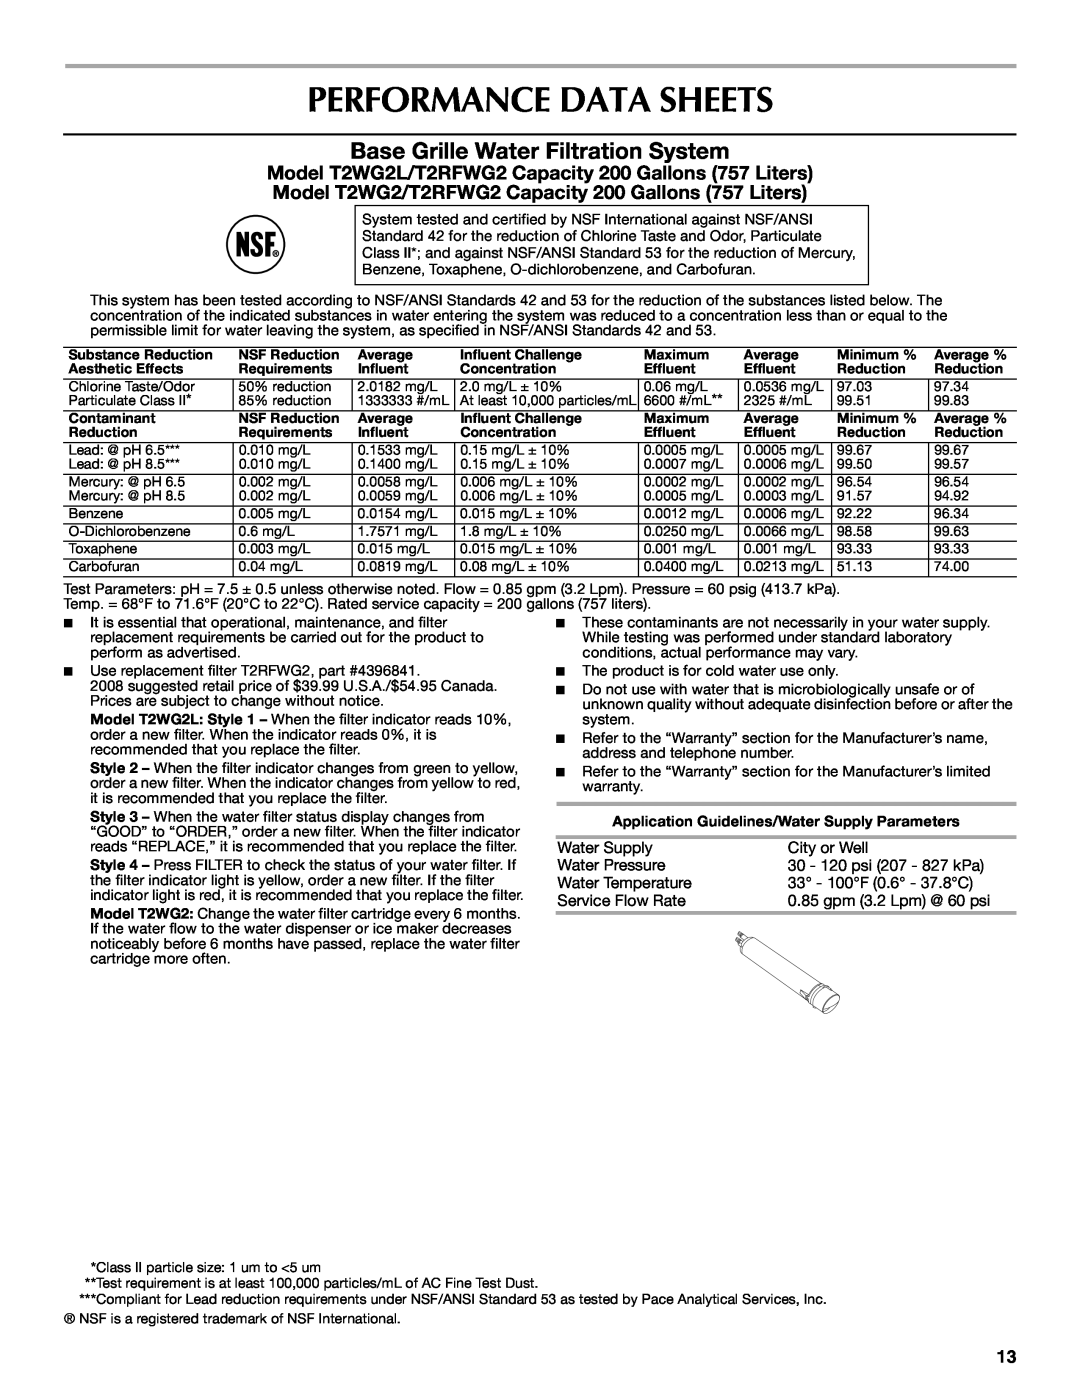 Maytag MSD2272VES installation instructions Performance Data Sheets, Base Grille Water Filtration System 